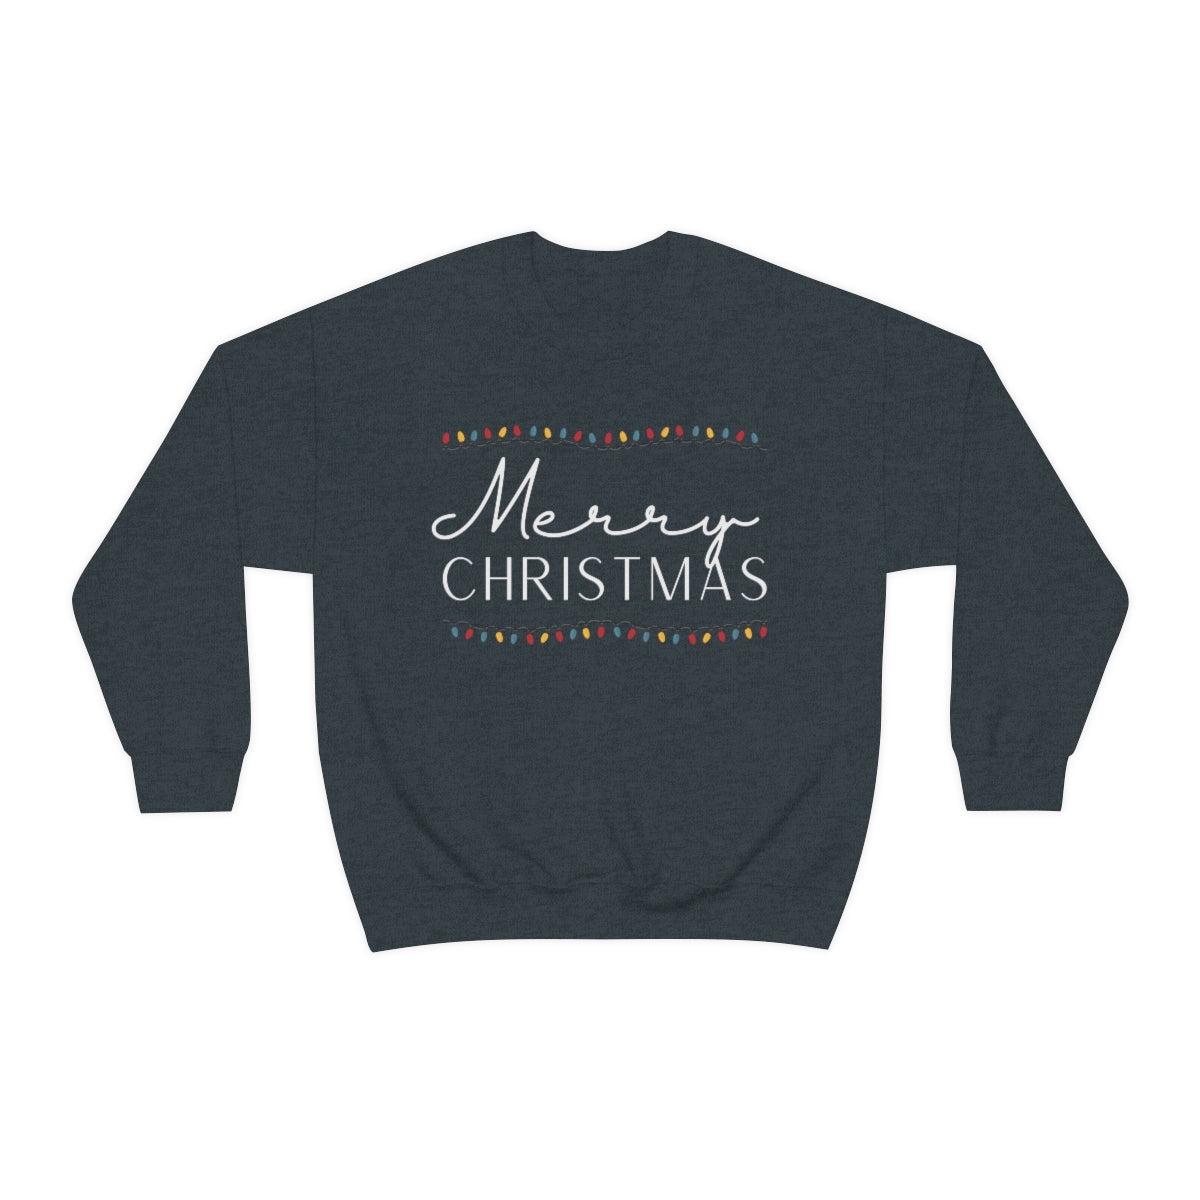 Merry Christmas Sweatshirt with Color Lights String